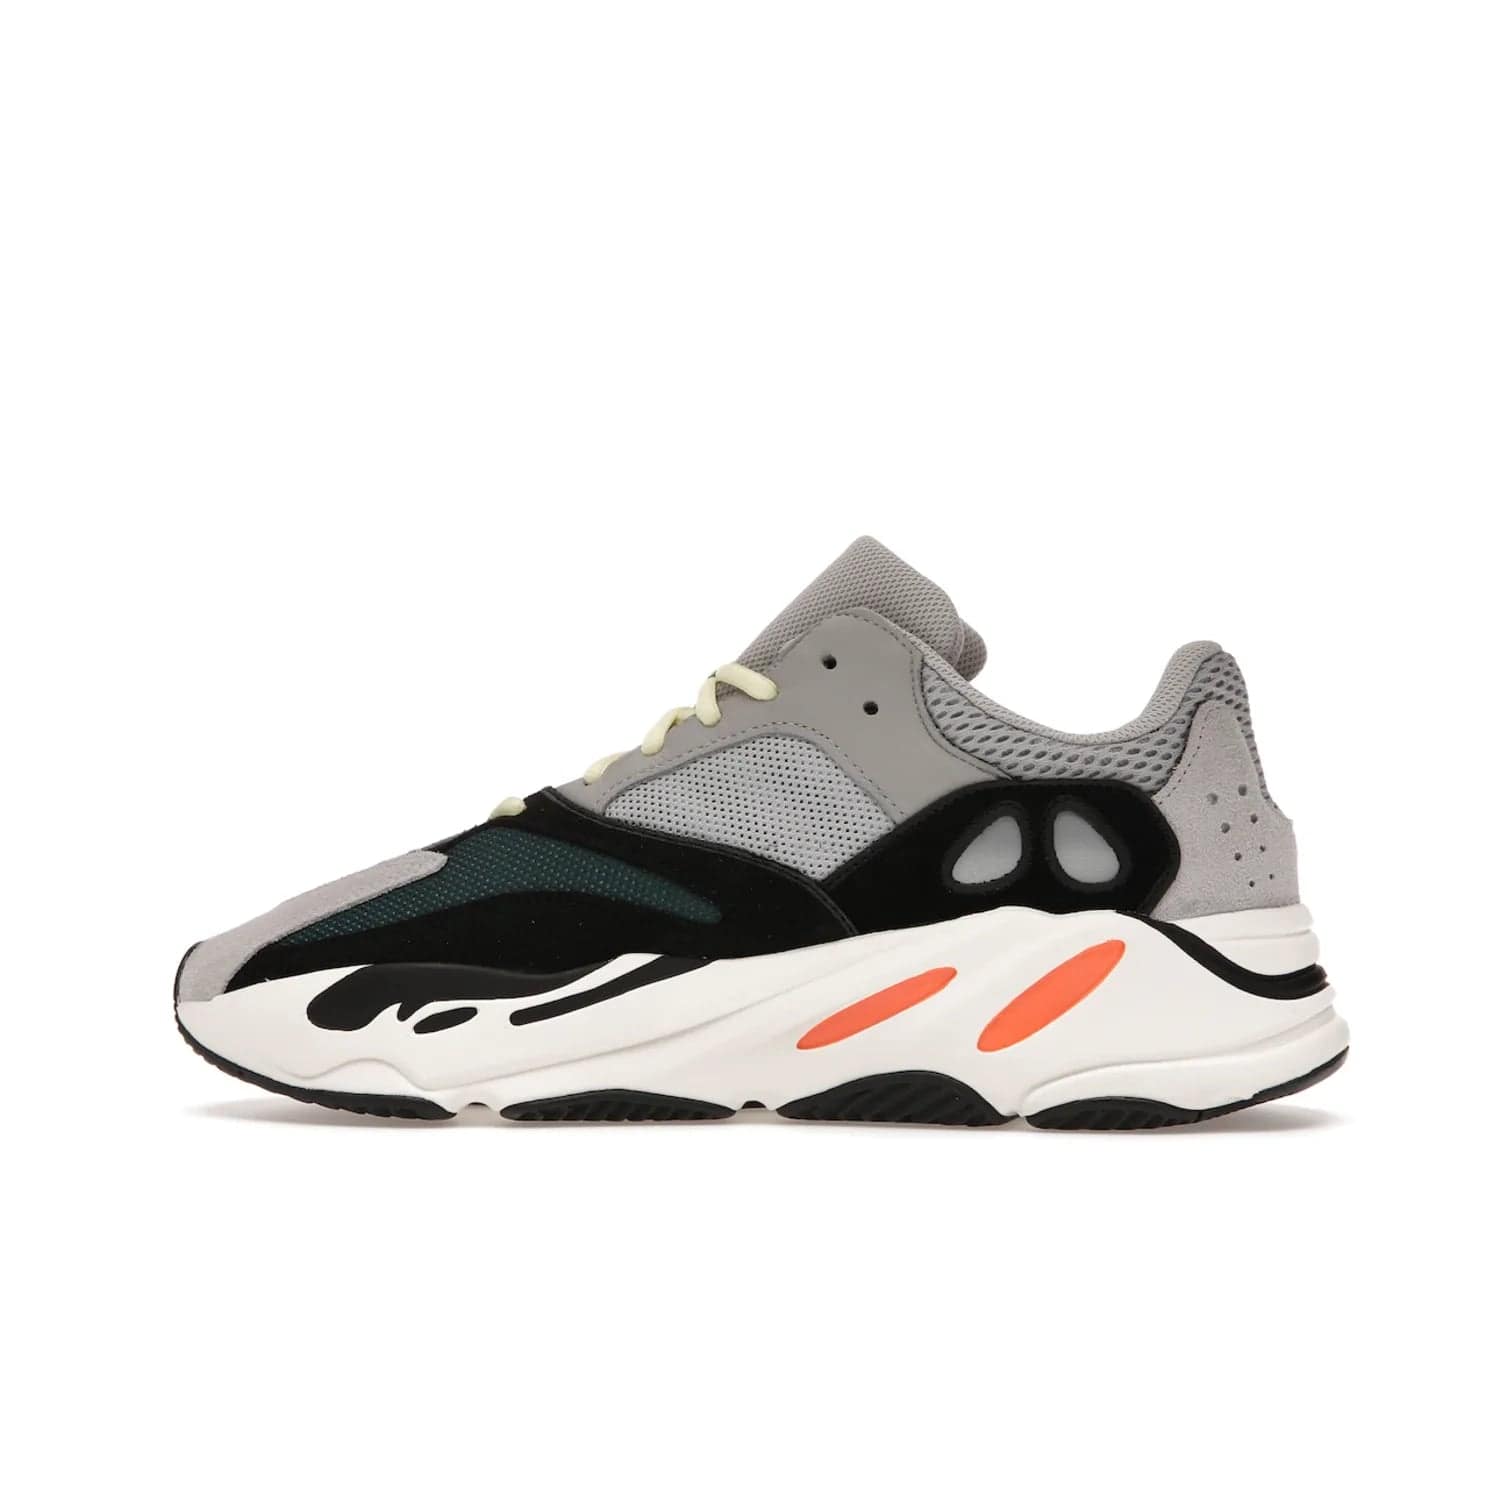 adidas Yeezy Boost 700 Wave Runner - Image 20 - Only at www.BallersClubKickz.com - Shop the iconic adidas Yeezy Boost 700 Wave Runner. Featuring grey mesh and leather upper, black suede overlays, teal mesh underlays, and signature Boost sole. Be bold & make a statement.